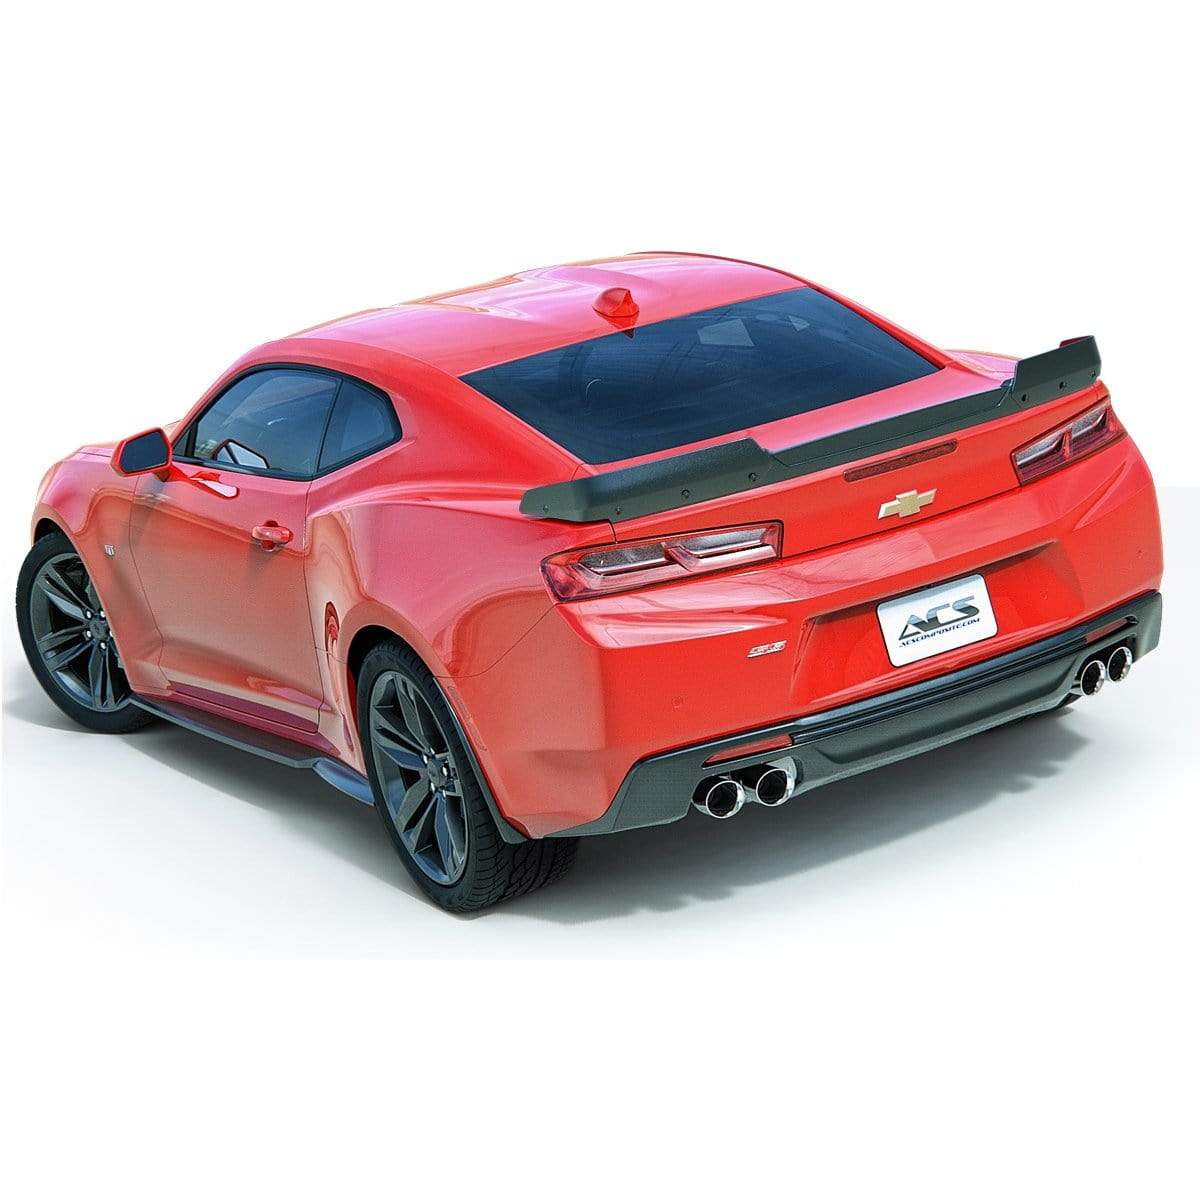 ACS Rear Spoiler Wicker Conversion Kit [48-4-103]GBA[00-4-007] in Gloss Black for Camaro 2016+ ZL1, SS, & LT LS I4 by ACS Composite